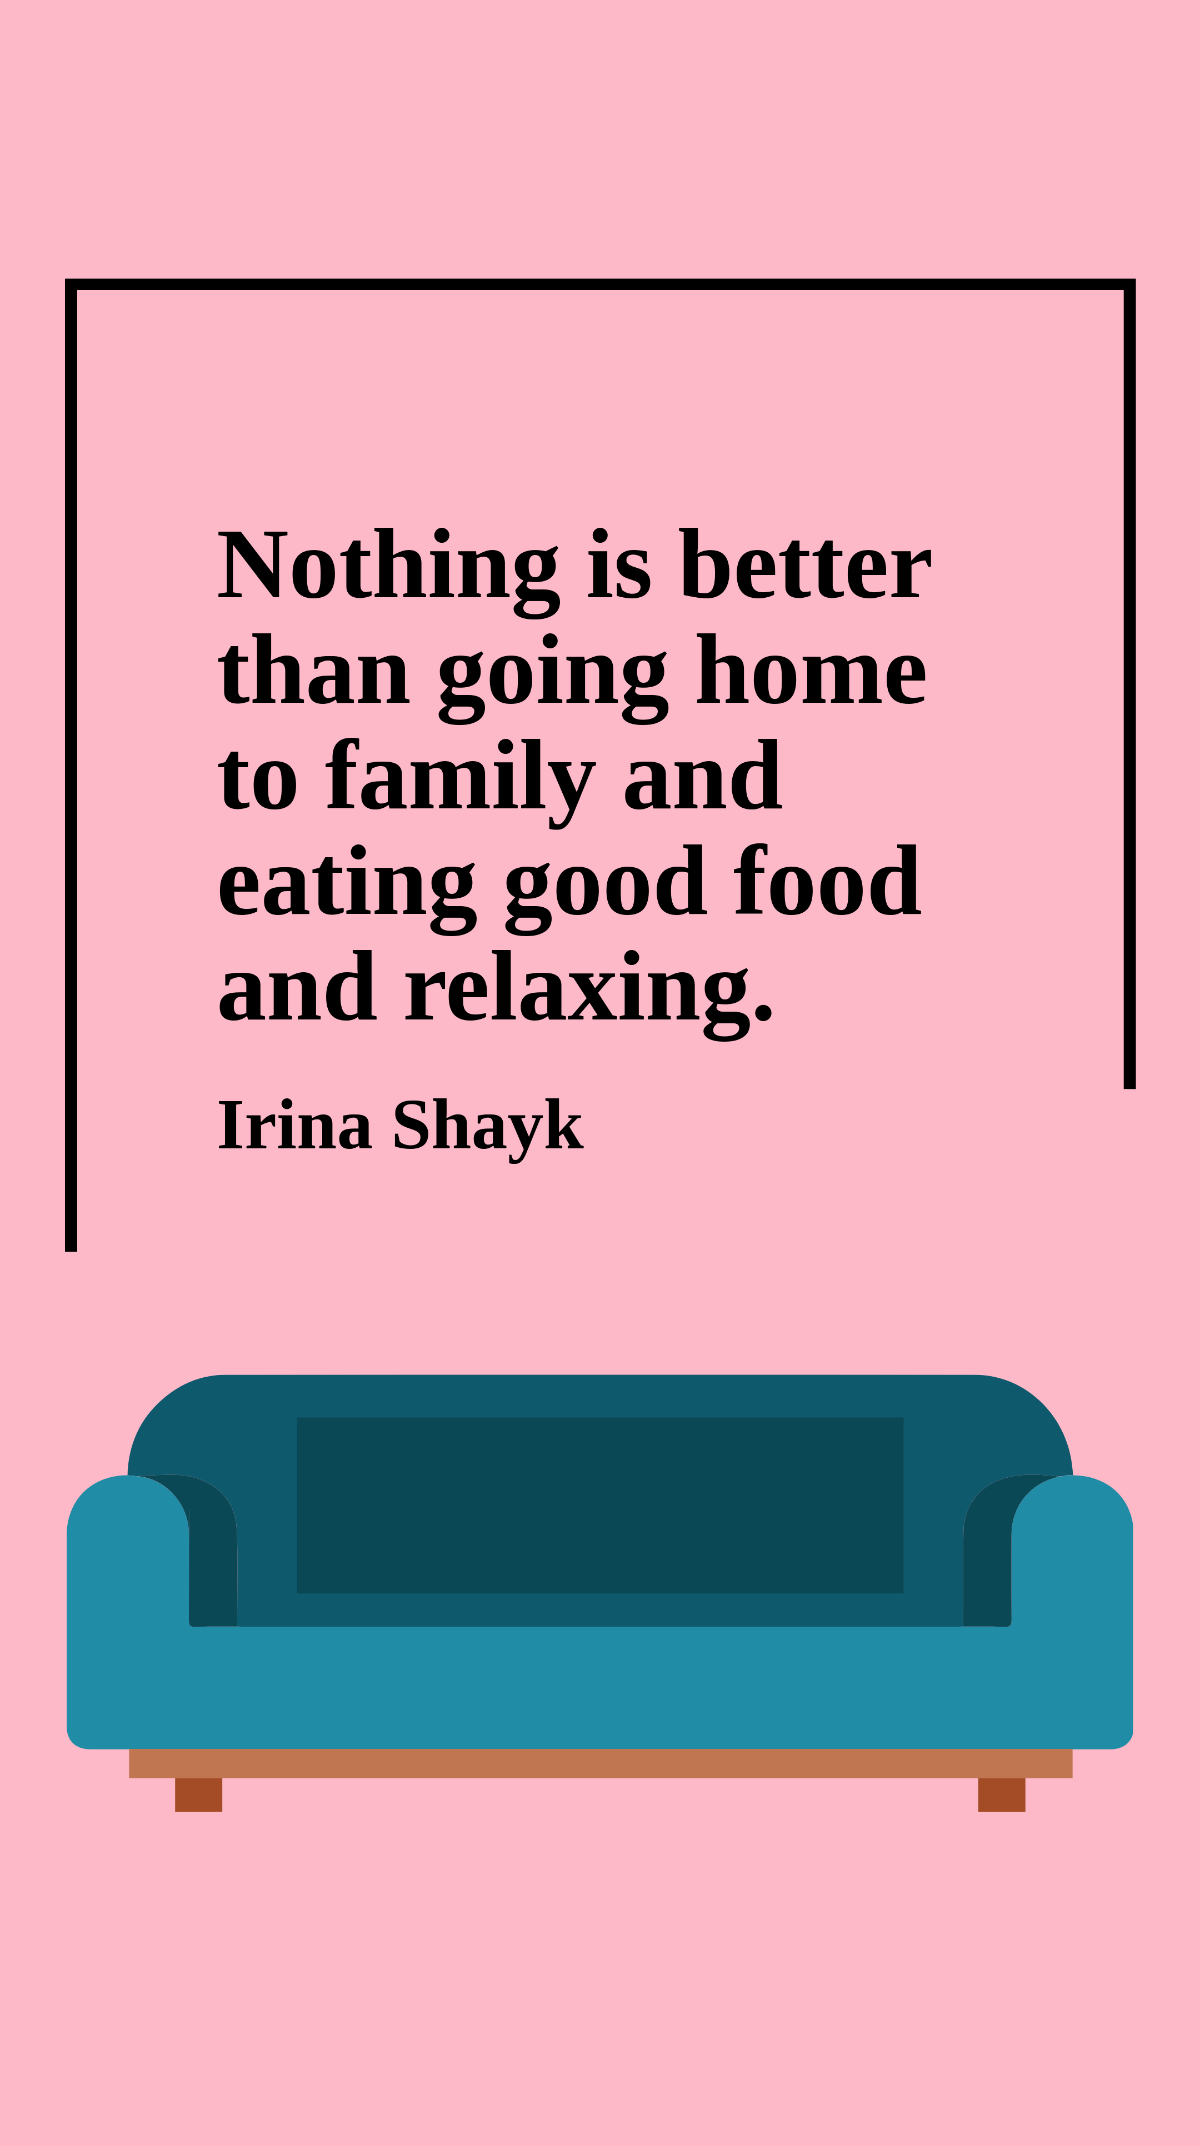 Irina Shayk - Nothing is better than going home to family and eating good food and relaxing. Template